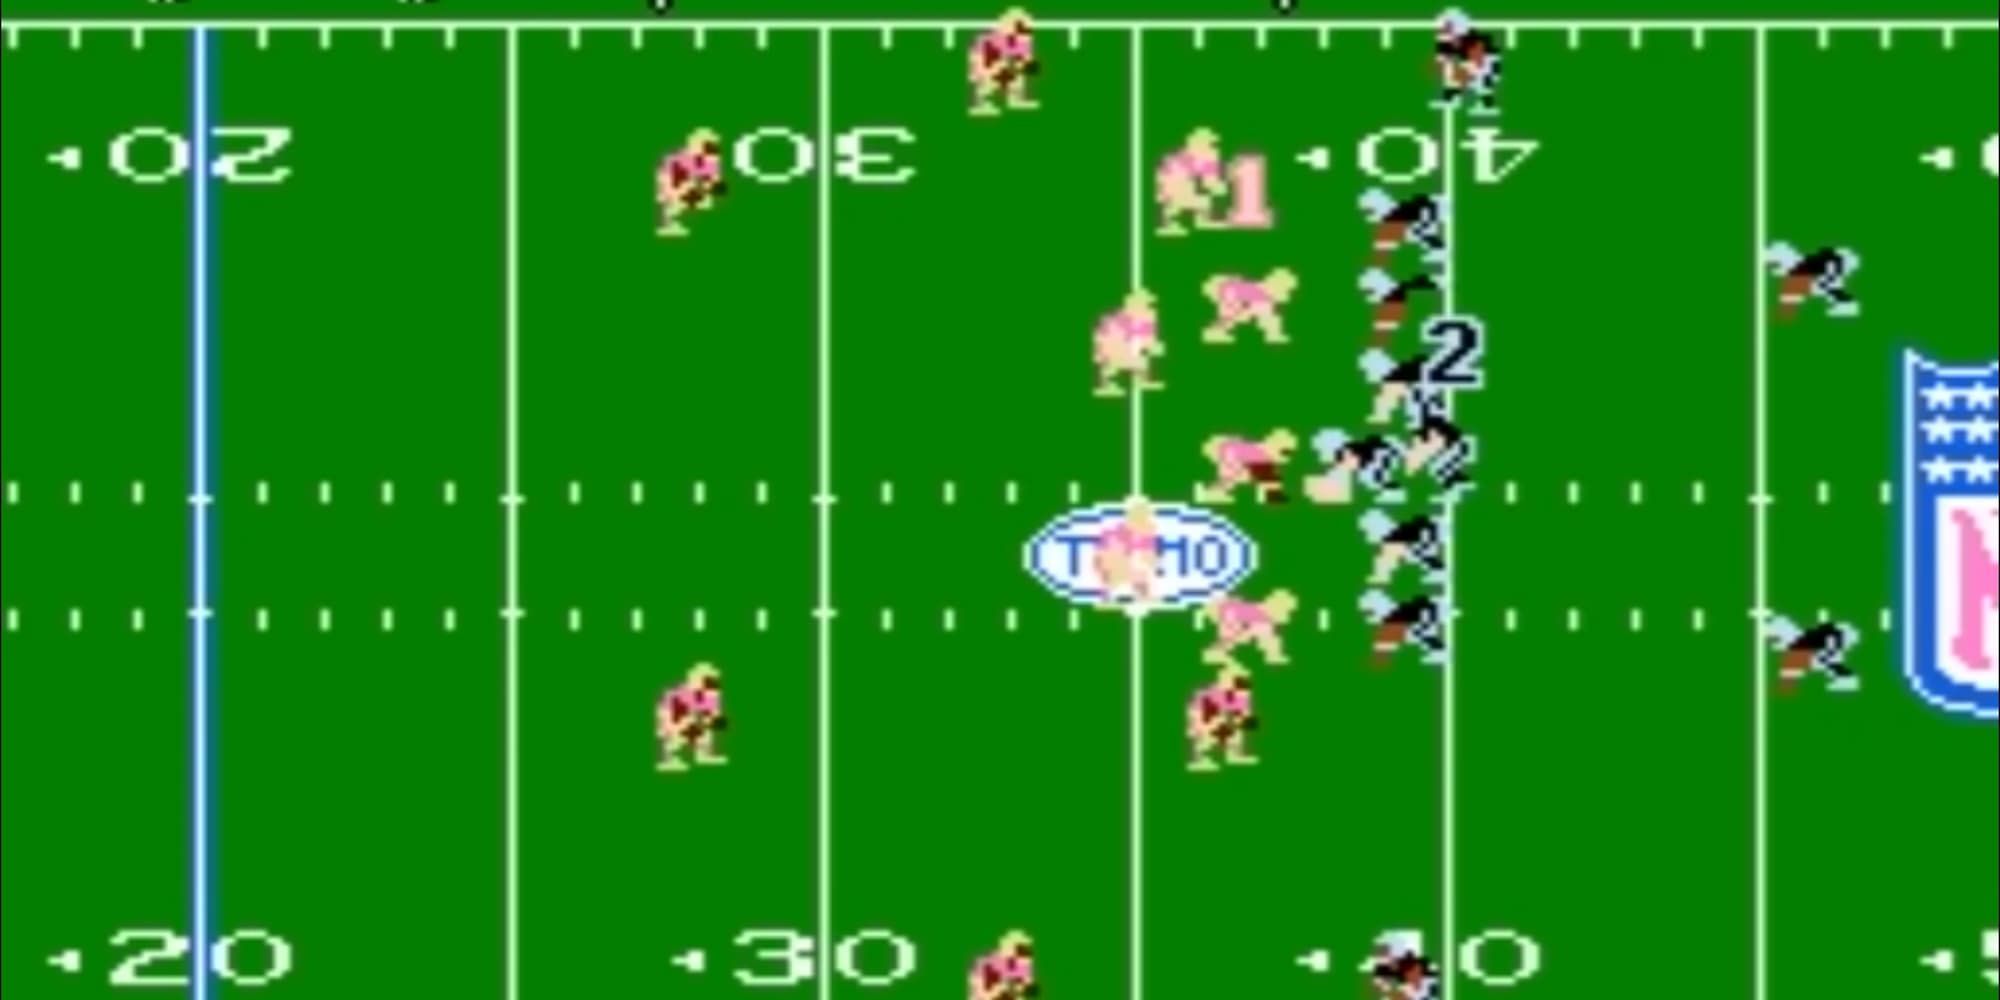 Two teams face off at the line of scrimmage in the Tecmo Super Bowl.